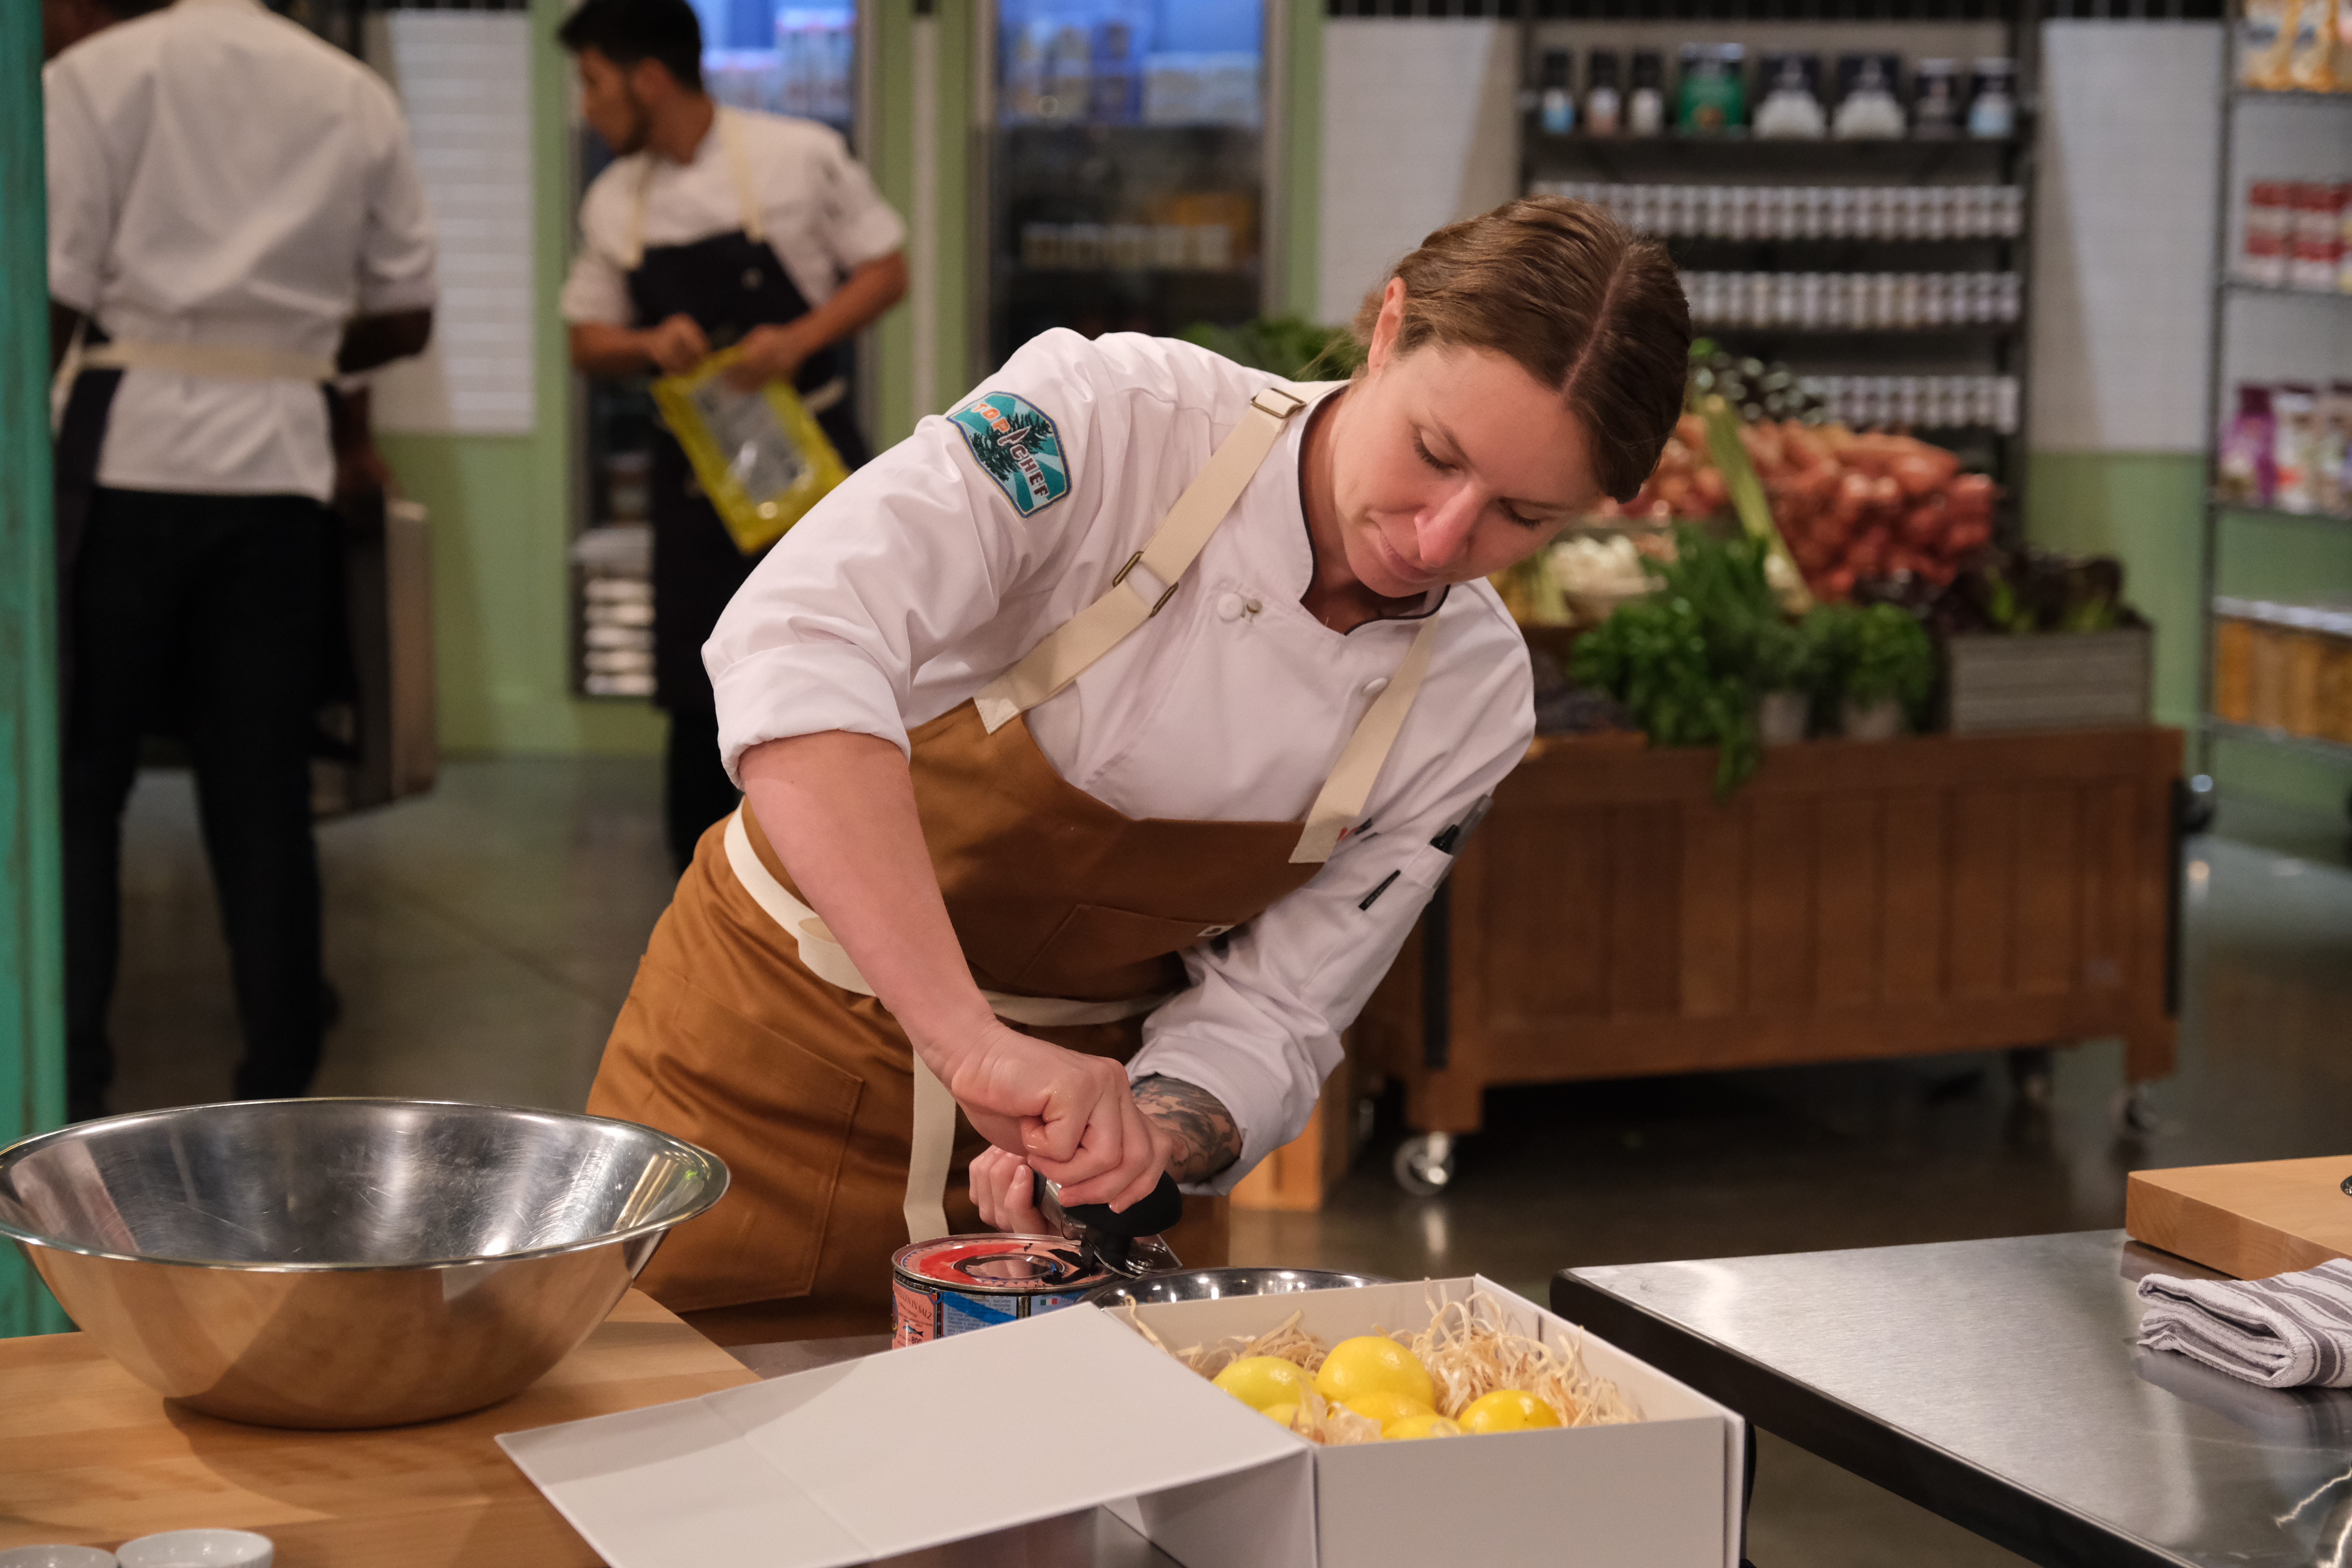 Sara Hauman leans over a lemon juicer during a challenge during the first episode of Top Chef season 18.